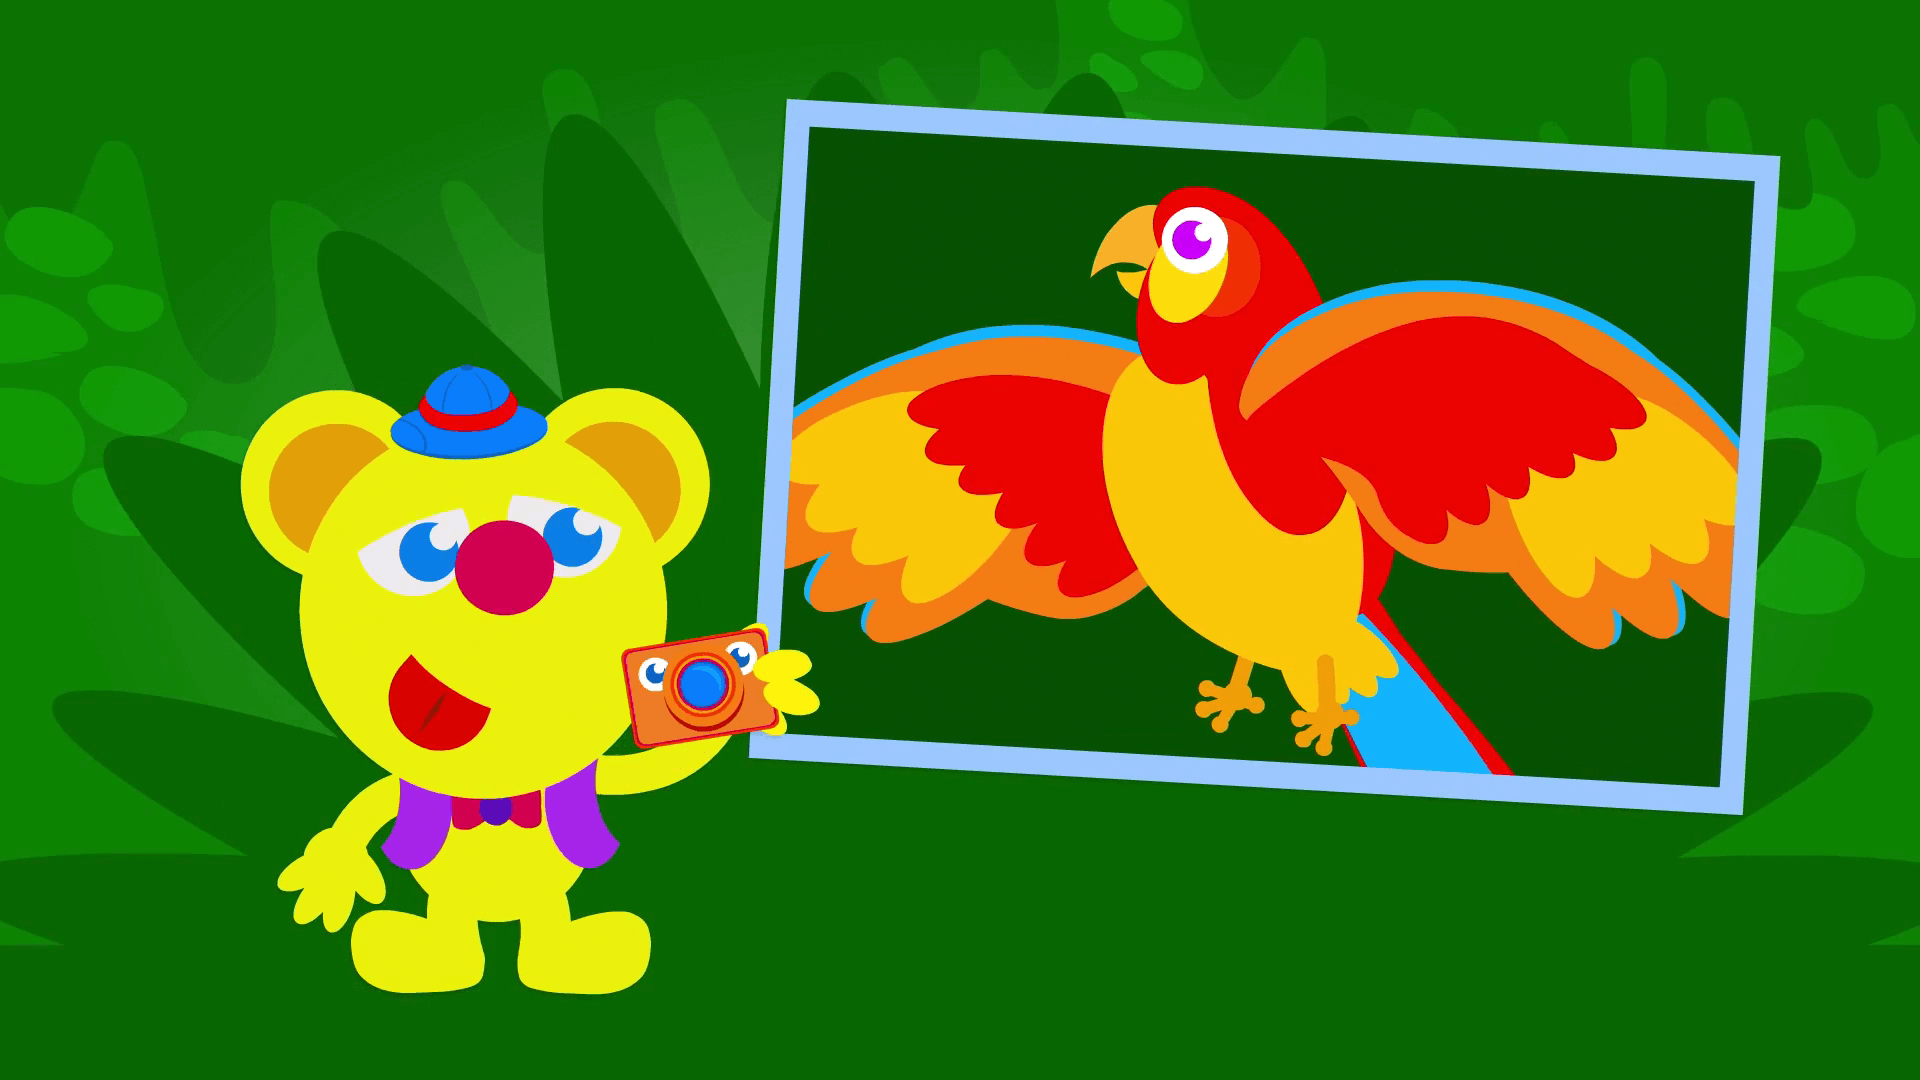 freddy takes photo of parrot episode of the kneebouncers show on babyfirsttv